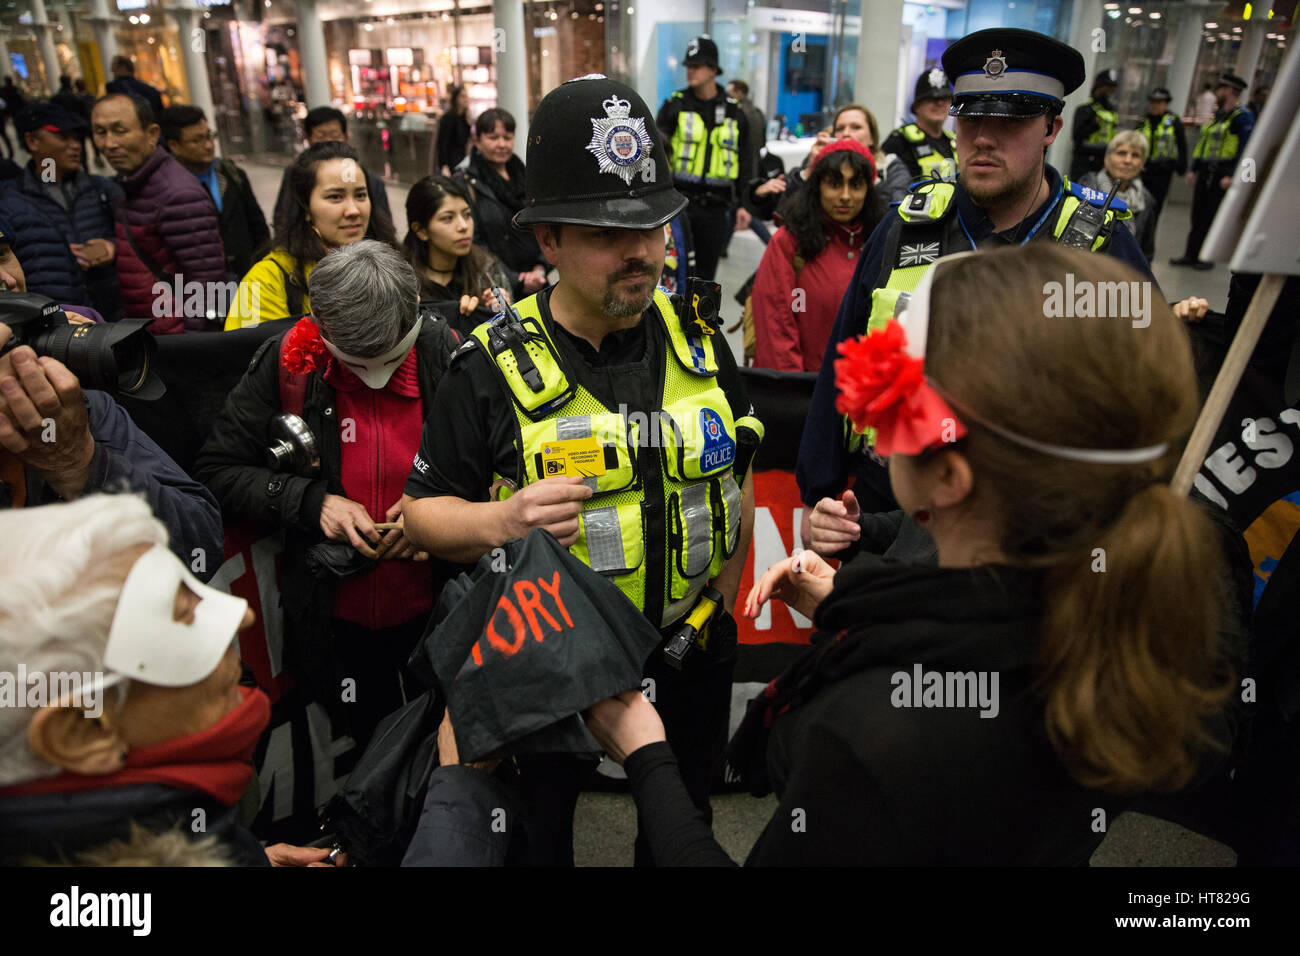 London, UK. 8th March, 2017. Police ask about the performance by women from Global Women's Strike, Women's Strike UK and Polish feminists at St Pancras station to coincide with International Women's Day and the International Women's Strike. Credit: Mark Kerrison/Alamy Live News Stock Photo